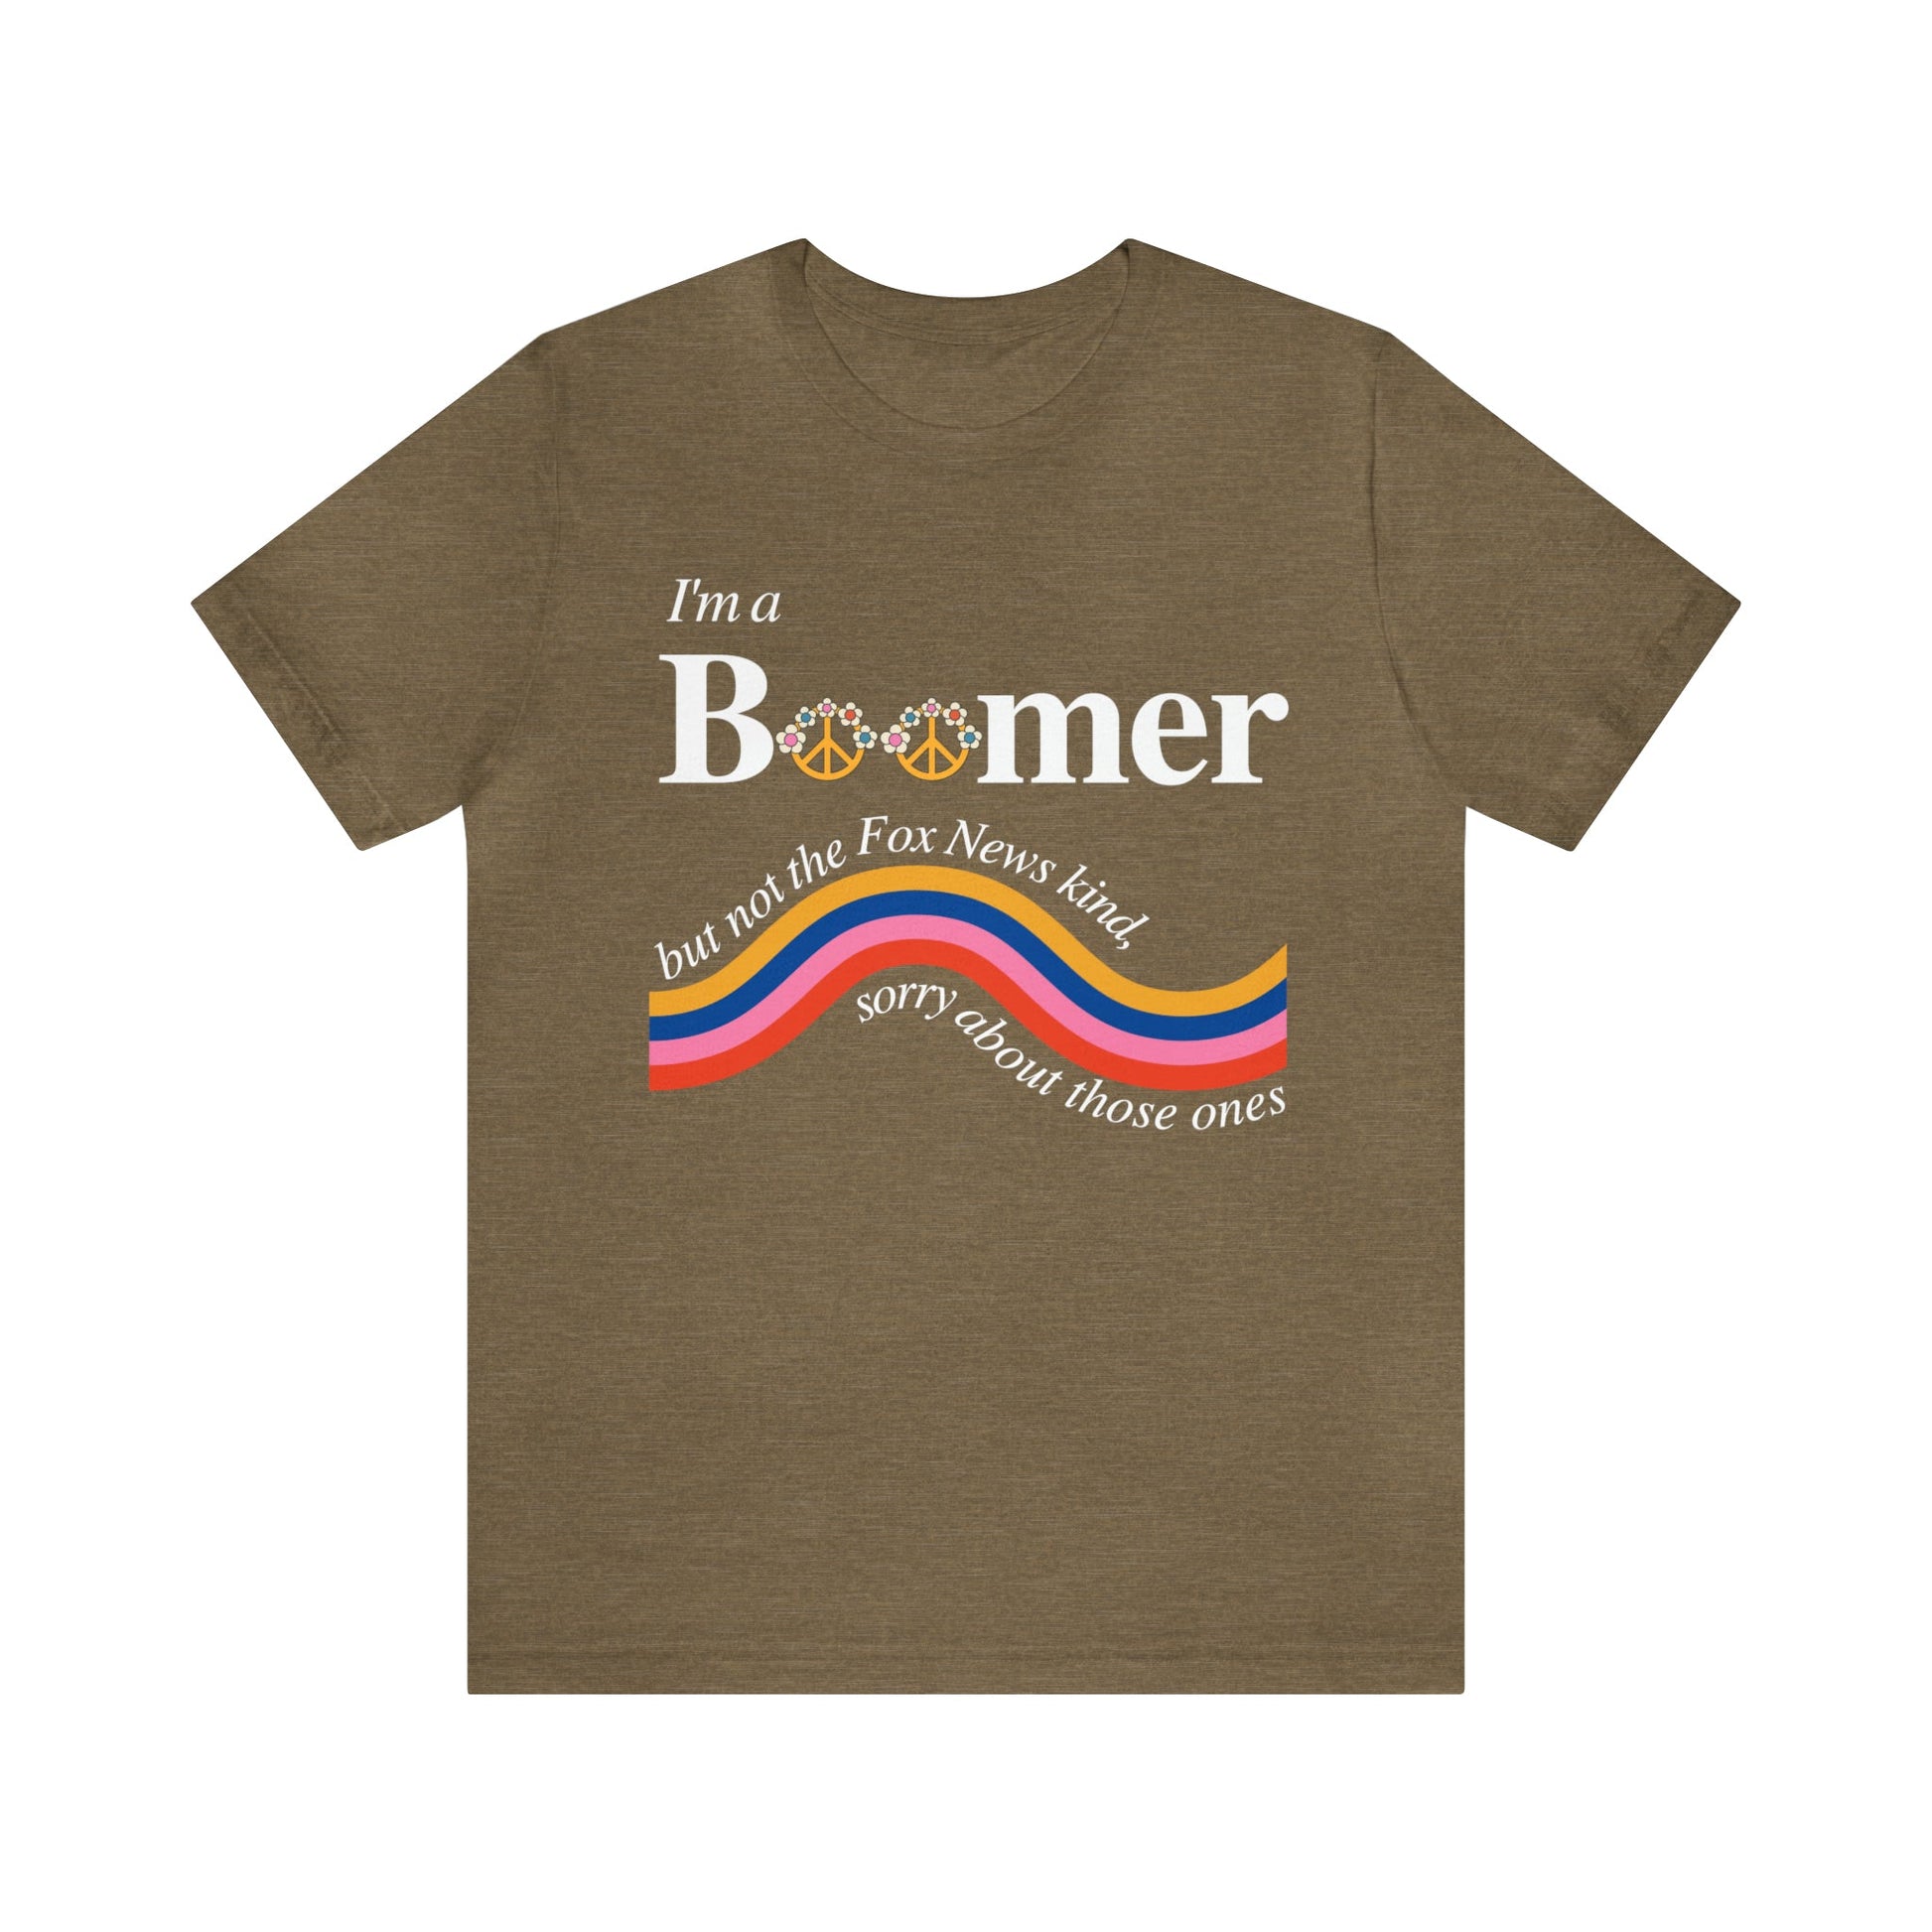 I'm a Boomer But Not the Fox News Kind Jersey Short Sleeve Tee [Multiple Color Options]